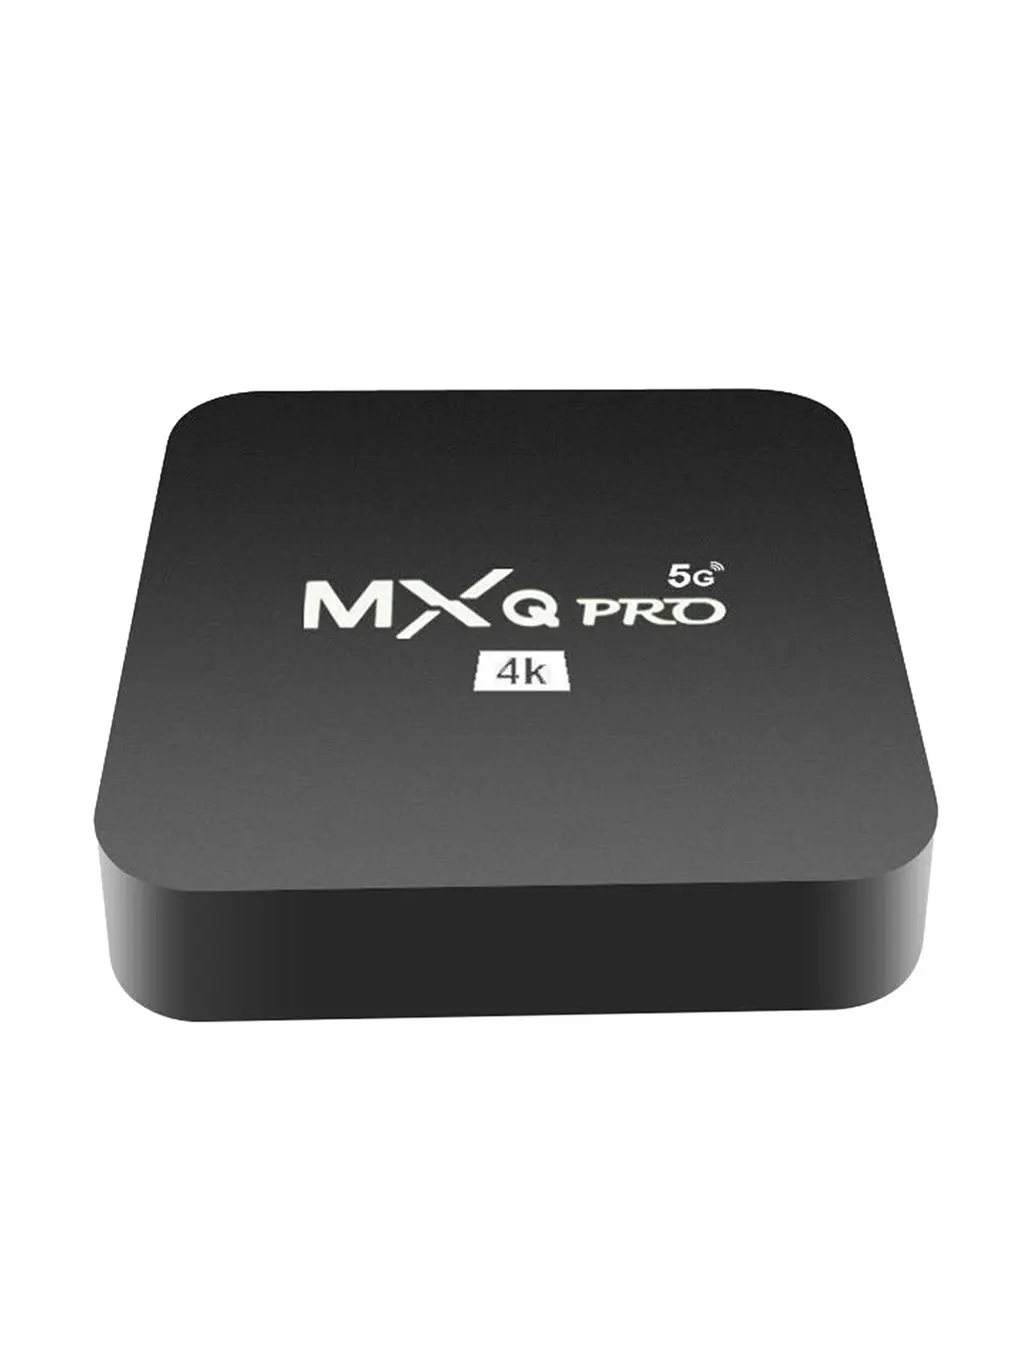 MXQPRO5G 4K Network Player Set-top Box Home Remote Control Box Smart Media Player TV Box RK3229-5G Version Home Care 4k android tv box rk3229 5g hd 3d smart set top box 1 8g wifi home remote control youtube media player set top box